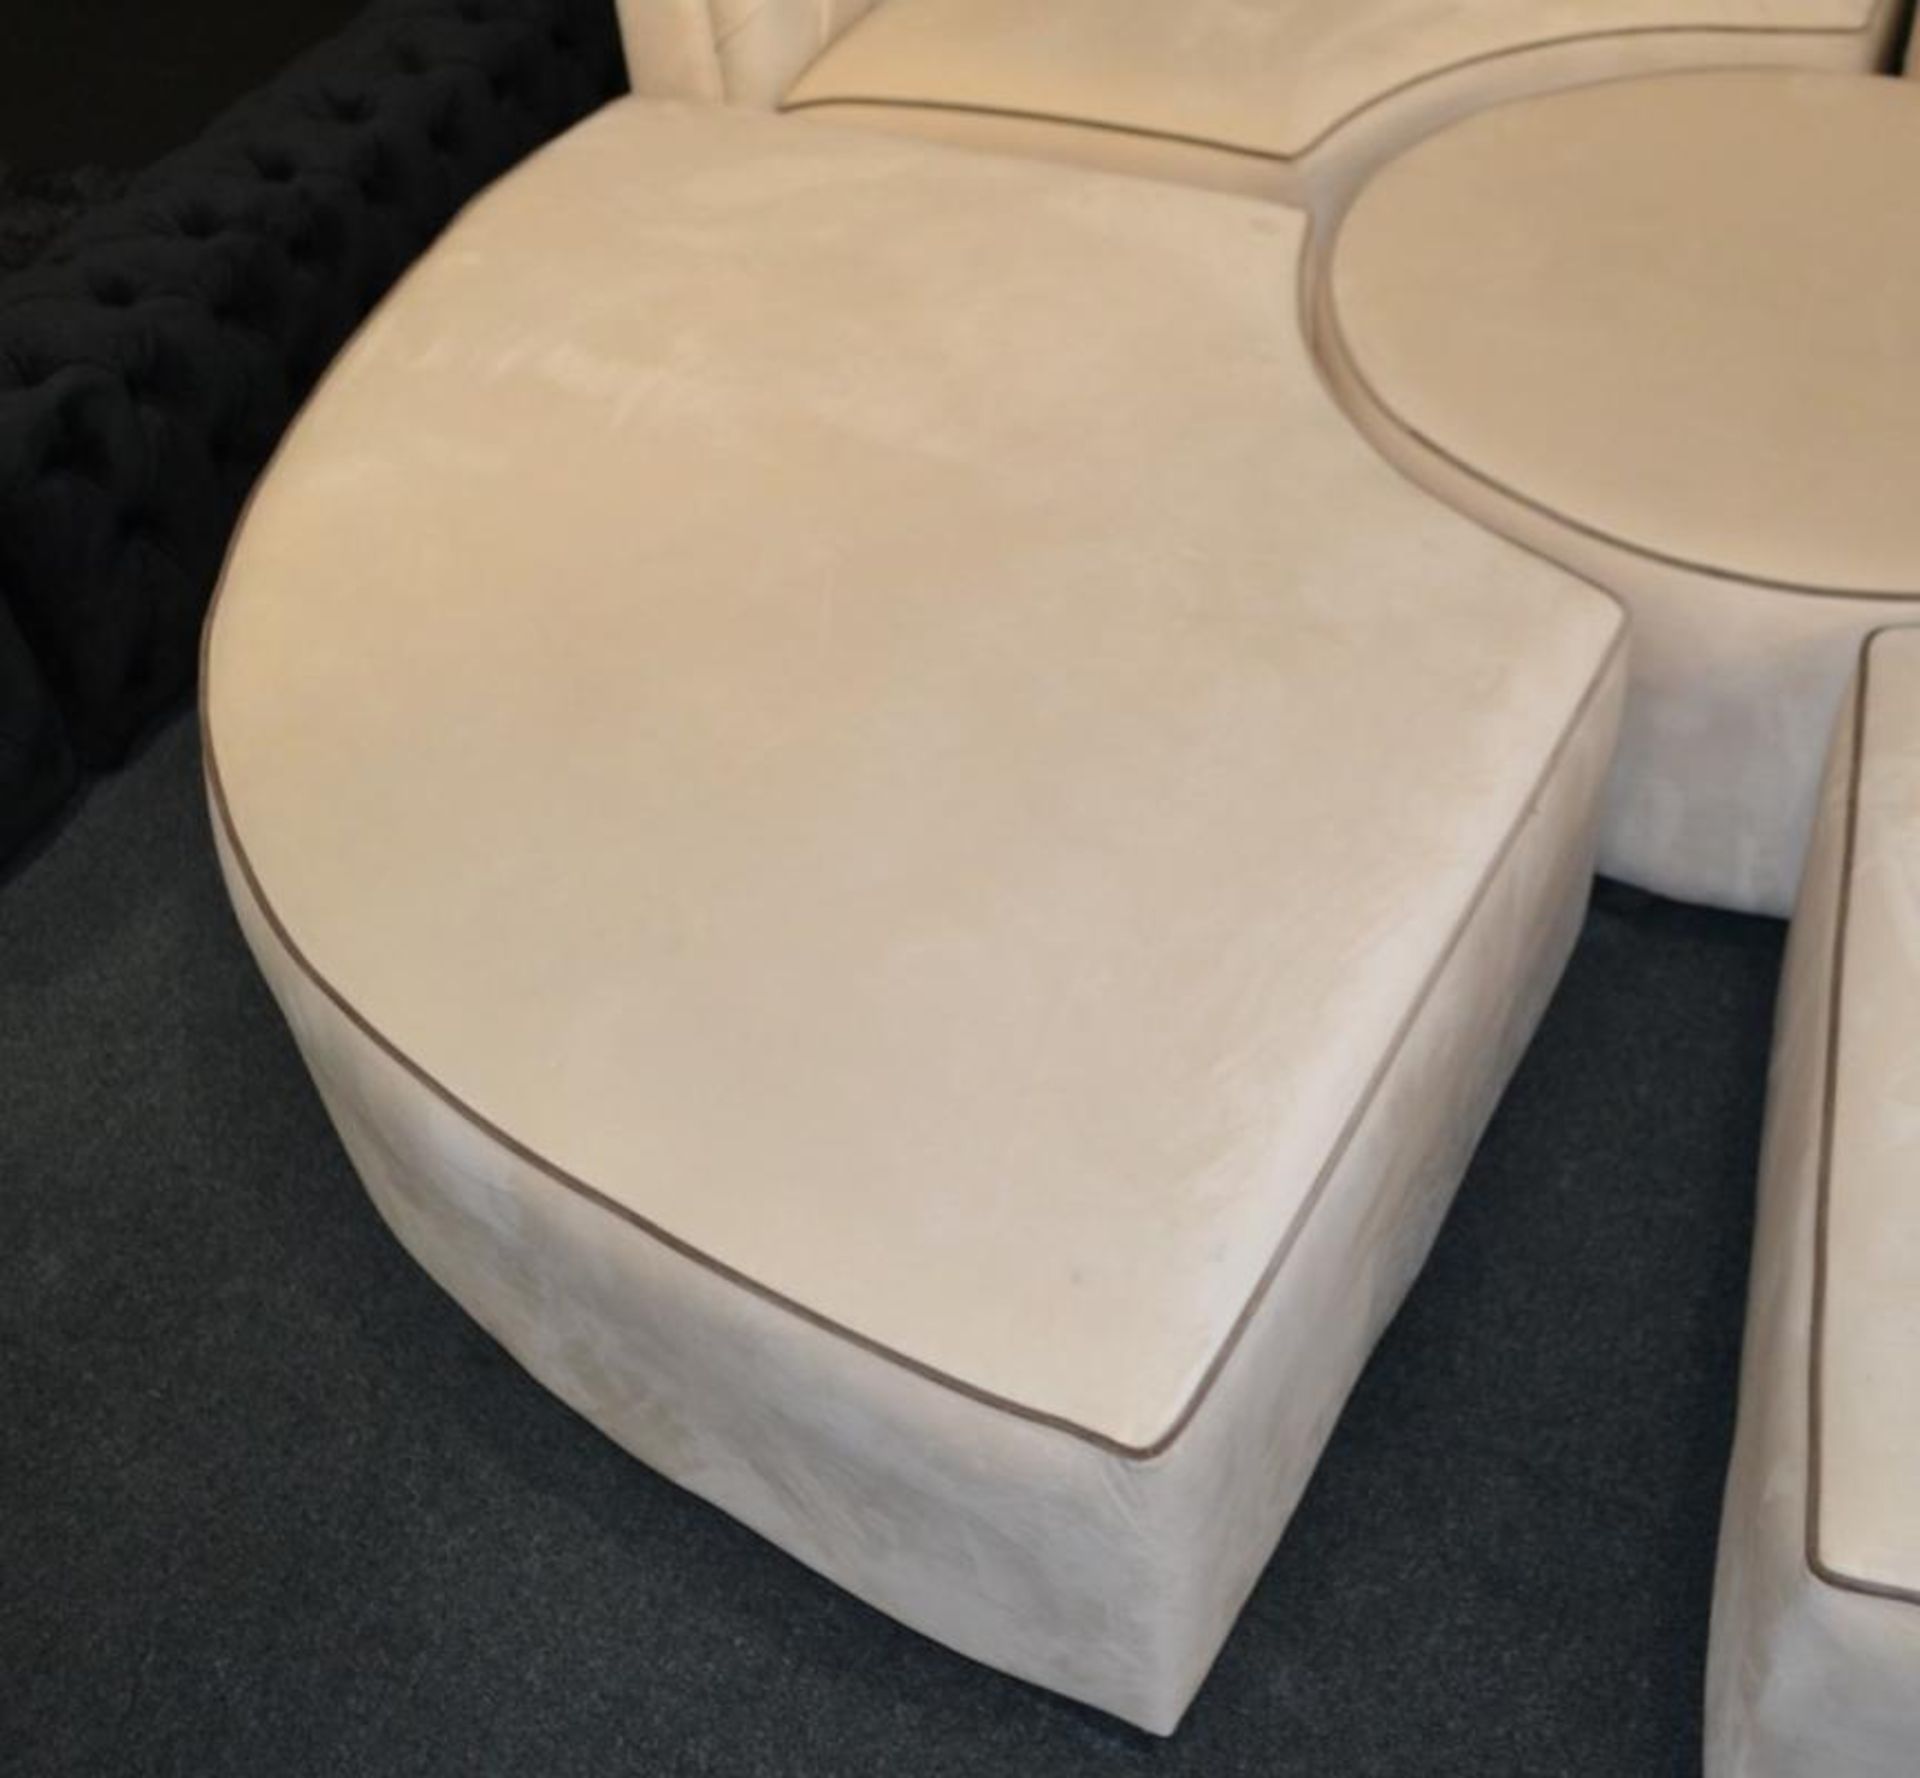 1 x Luxurious Bespoke Cream Velour 5 Piece Sofa Set. A truly beautiful bespoke piece that will give - Image 6 of 8